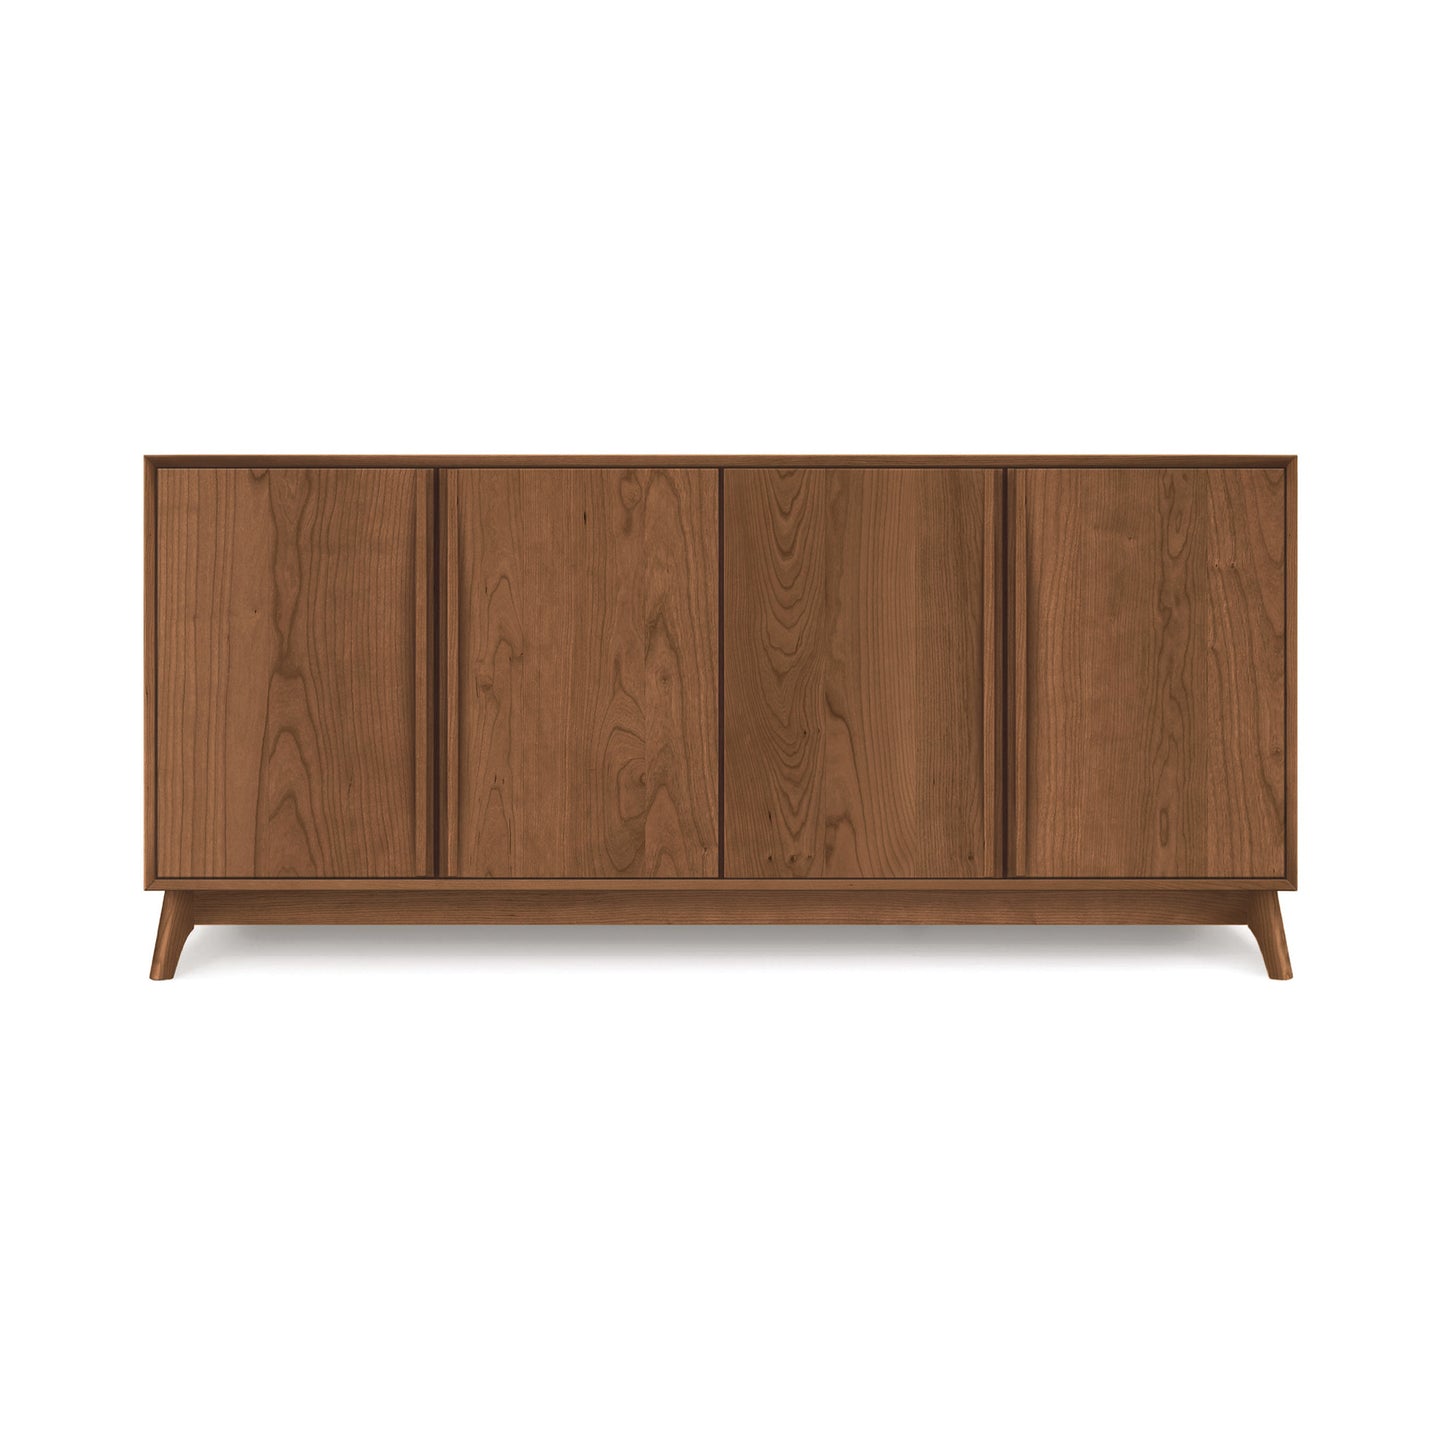 A luxury modern wooden Catalina 4-Door Buffet with closed doors and angled legs against a white background by Copeland Furniture.